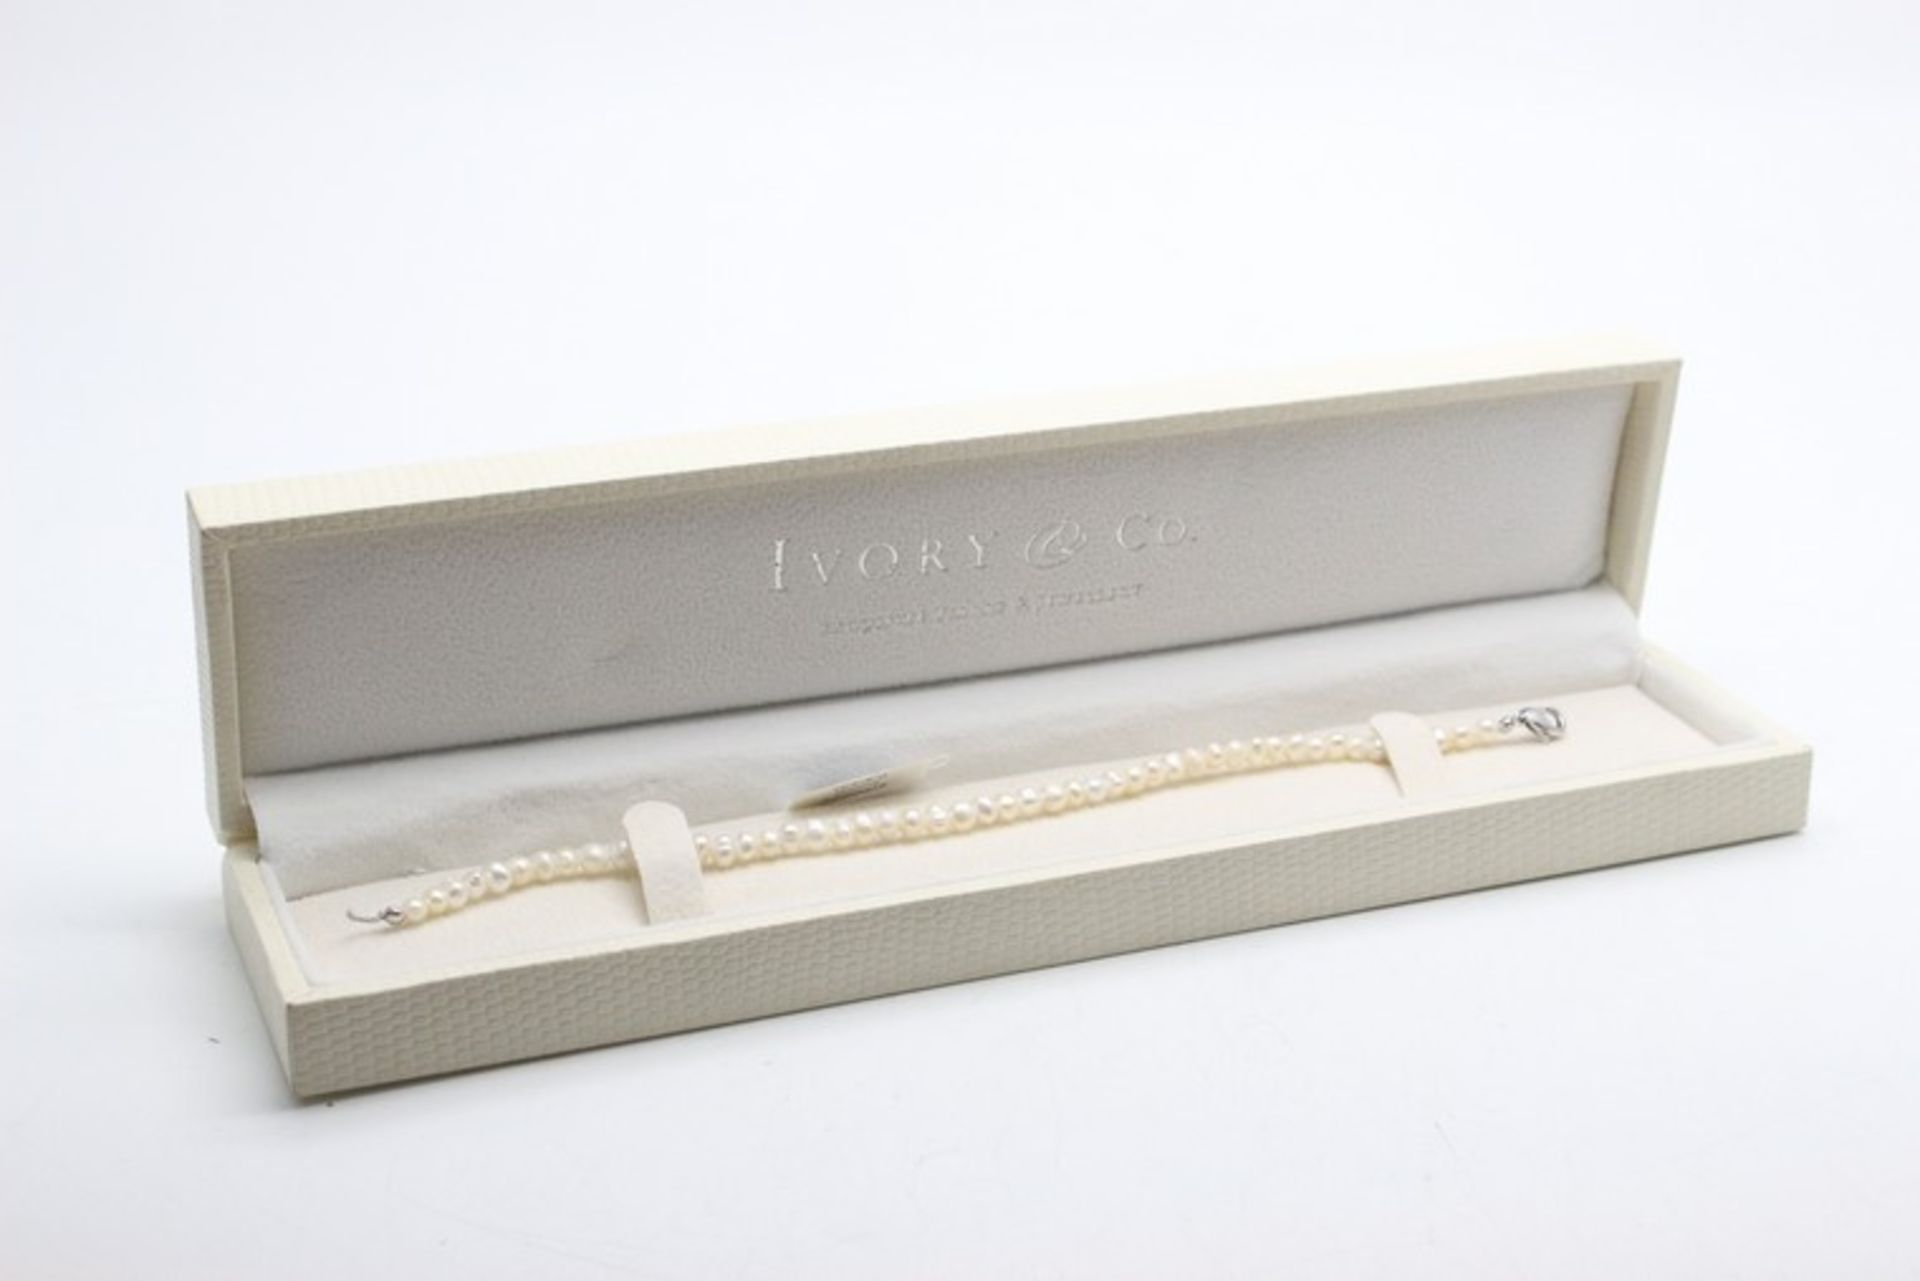 1 x BOXED IVORY AND CO WOMENS DESIGNER BRACELET (07.09.17) (1551085) *PLEASE NOTE THAT THE BID PRICE